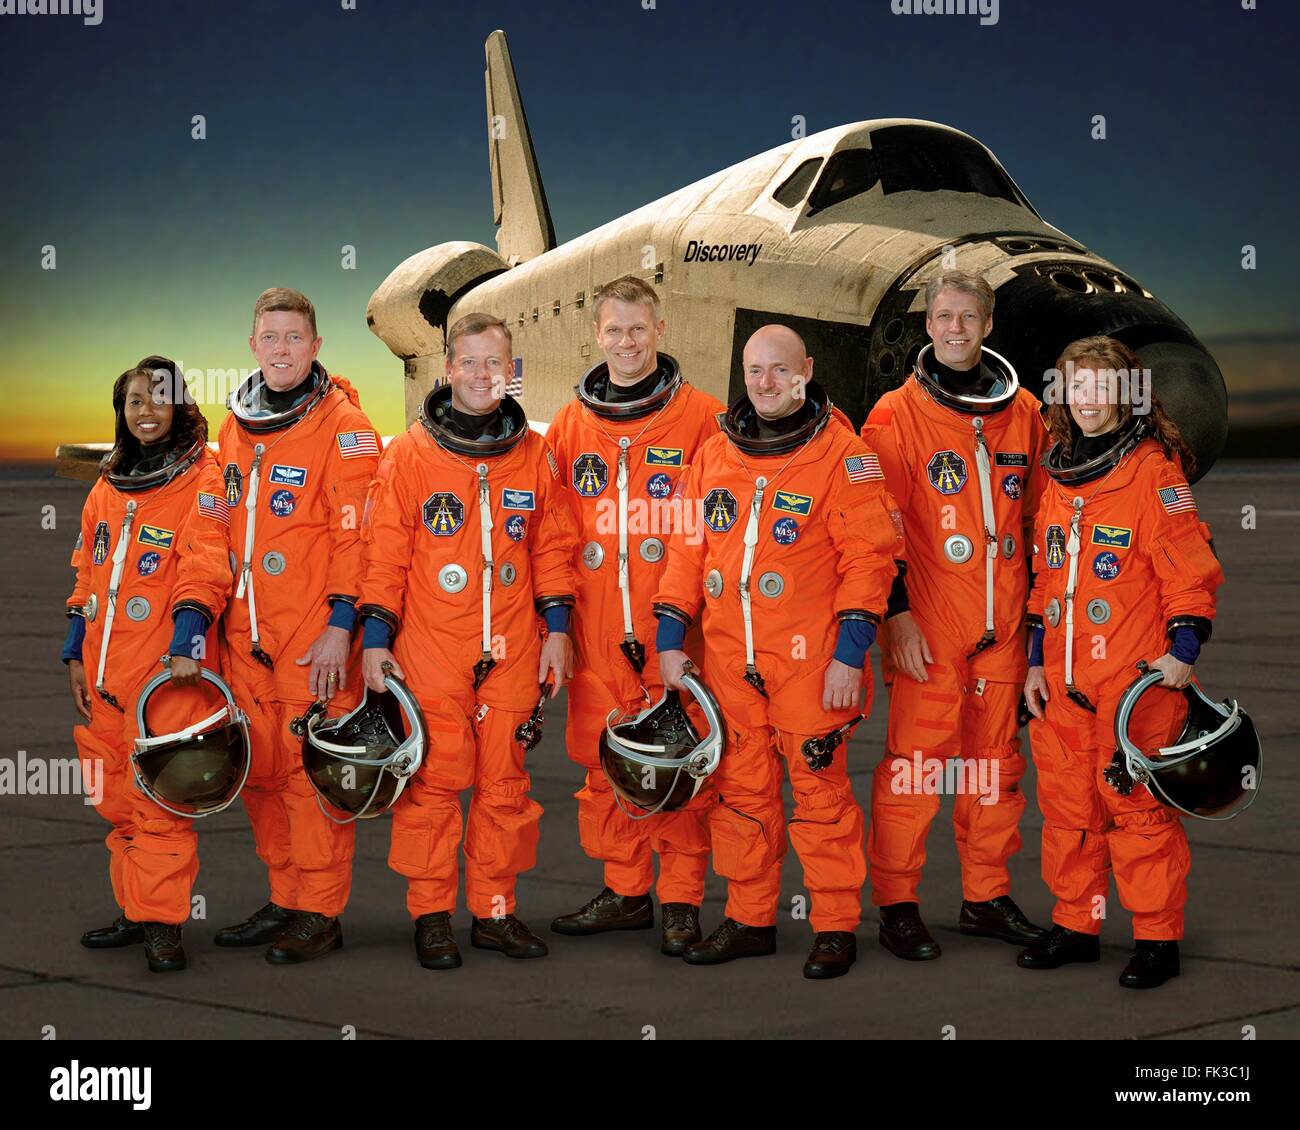 Group portrait of the STS-121 space shuttle crew astronauts in orange launch and entry suits at the Johnson Space Center April 5, 2006 in Houston, Texas.  The crew from L-R: Astronauts Stephanie Wilson, Michael Fossum, Steven Lindsey, Piers Sellers, Mark Kelly, Thomas Reiter and Lisa Nowak. Stock Photo